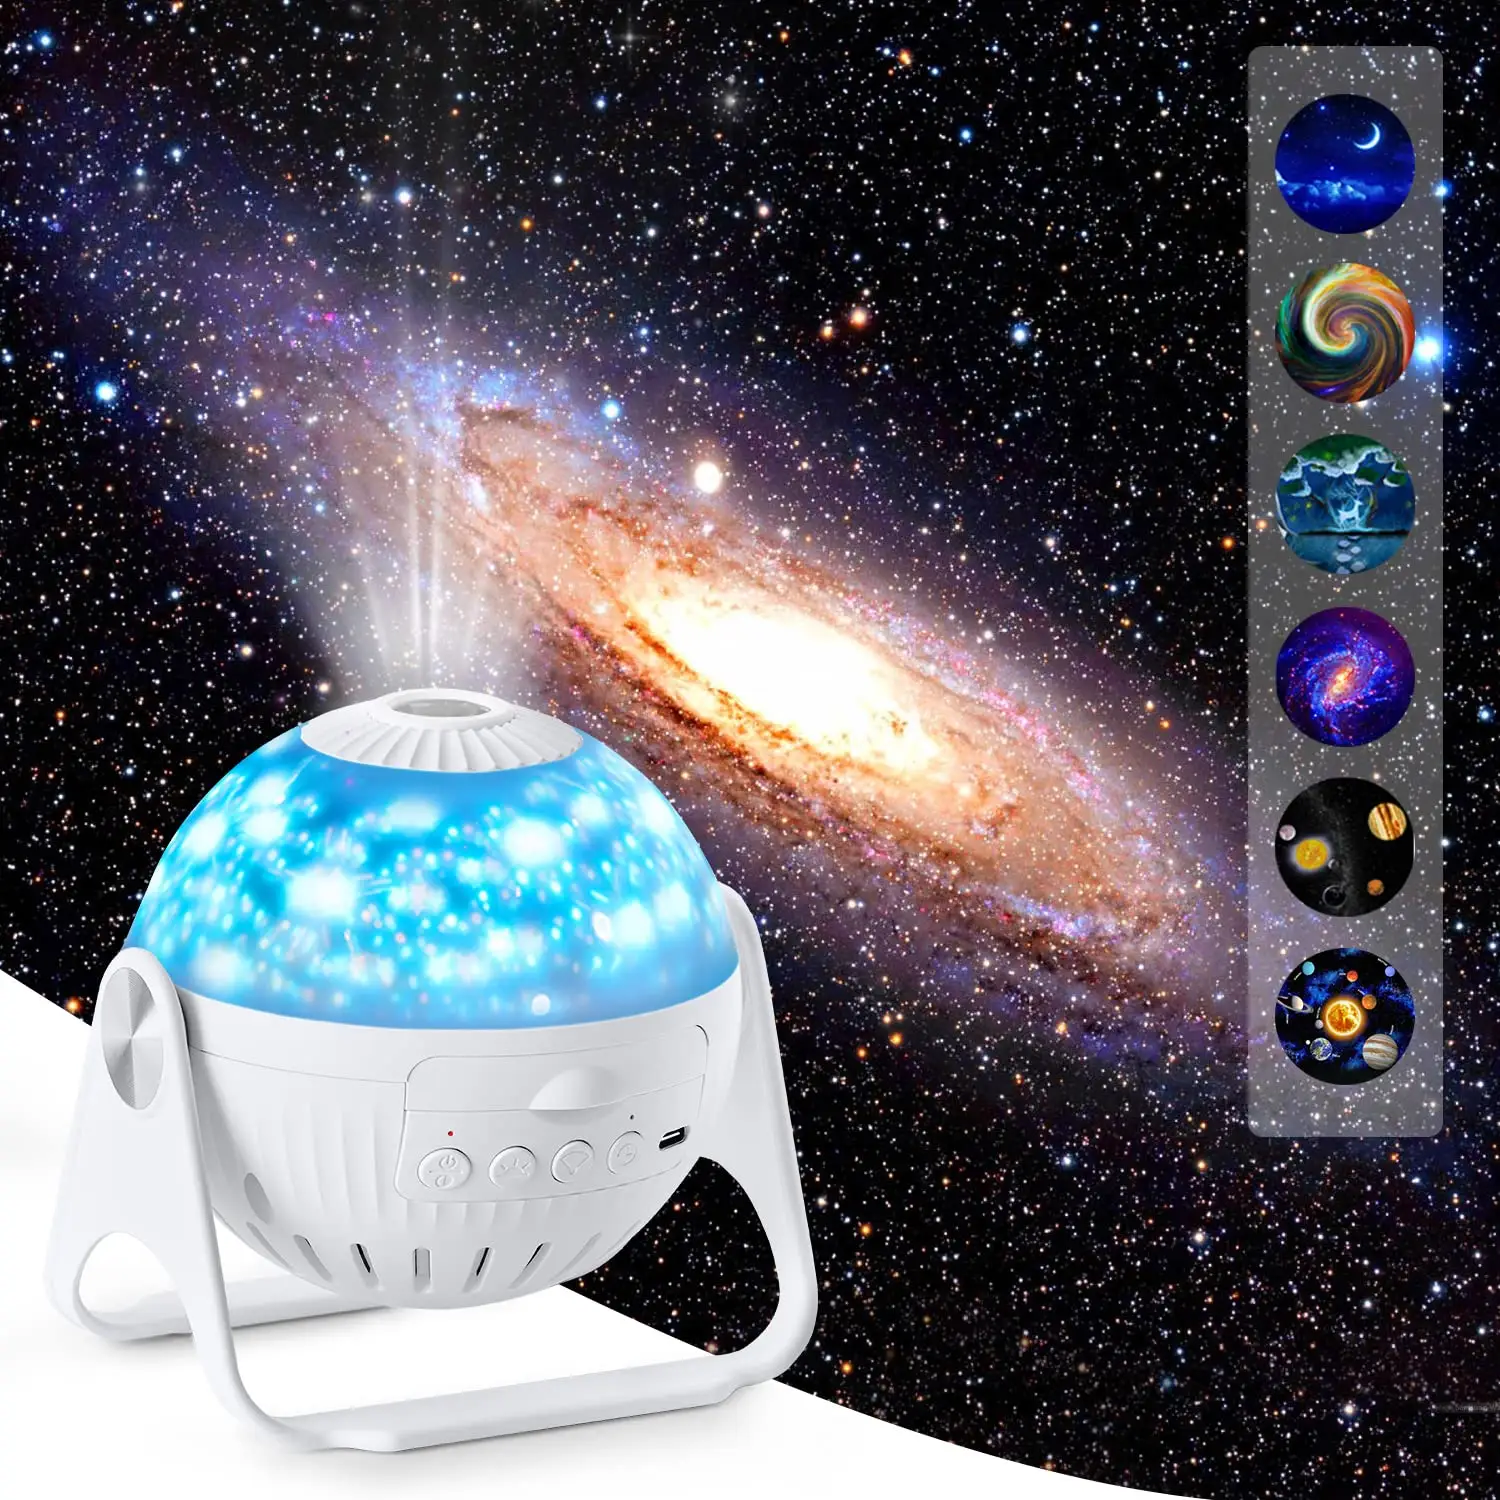 Led 360 Rotate Star Starry Sky Night Light For Hoom Bedroom Decoration Kids Child Birthday Gift Galaxy Projector